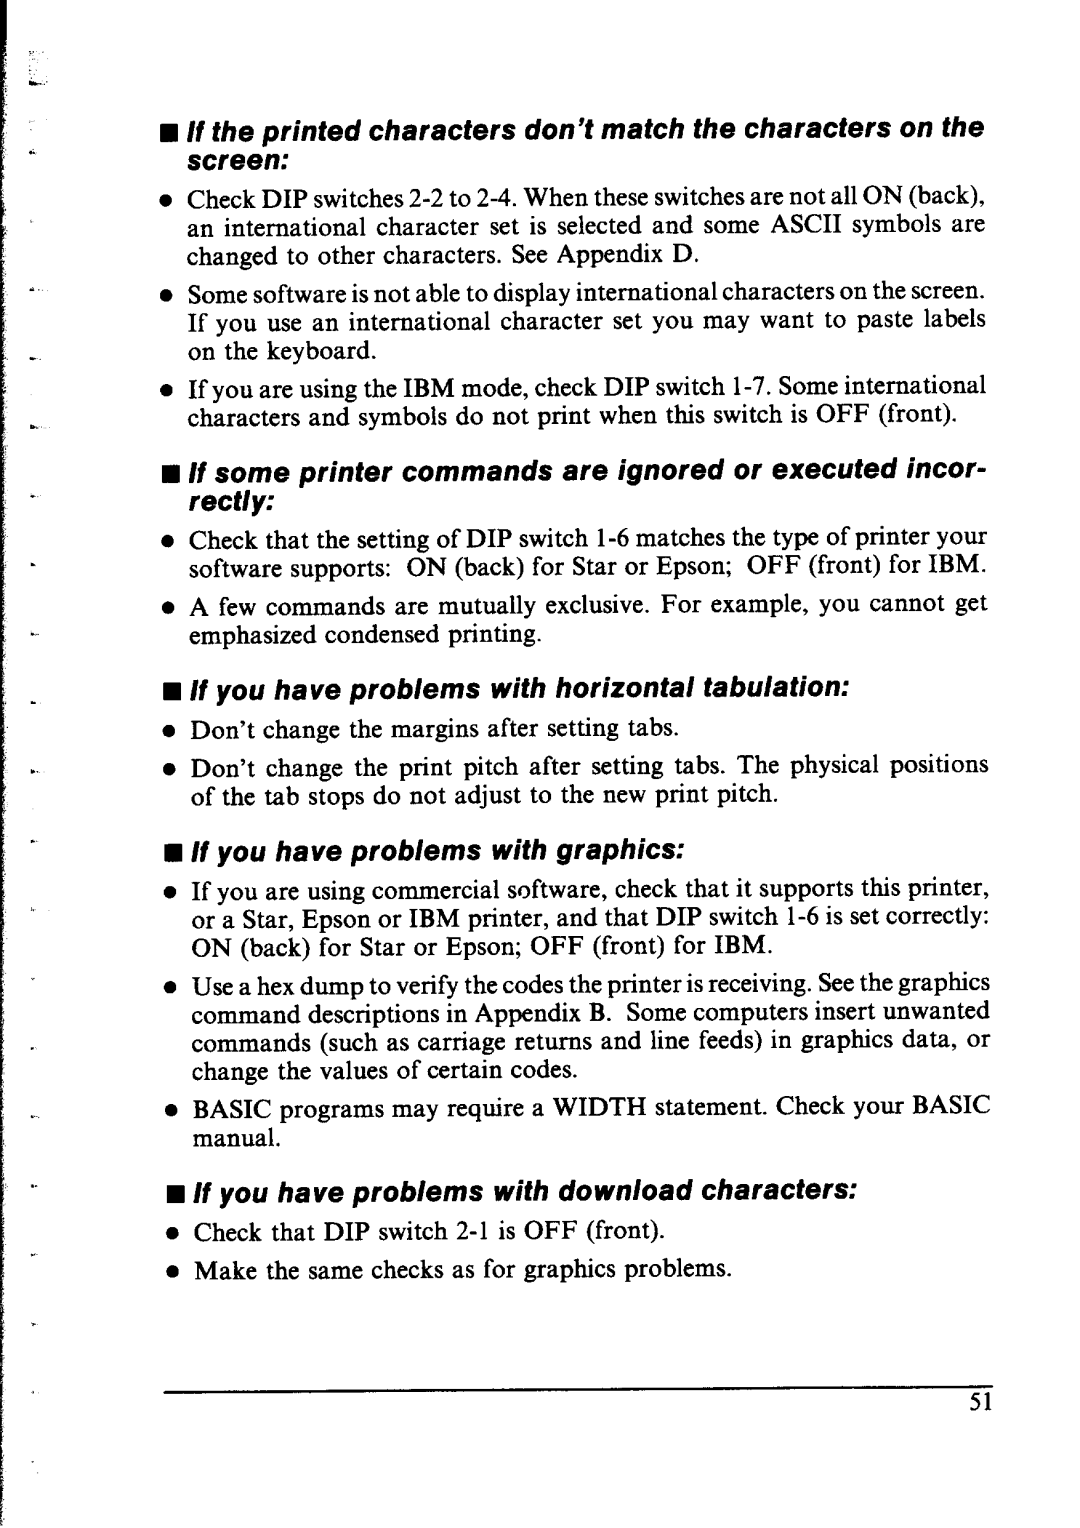 Star Micronics NX-1000 manual n If the printed characters don’t match the characters on the screen 